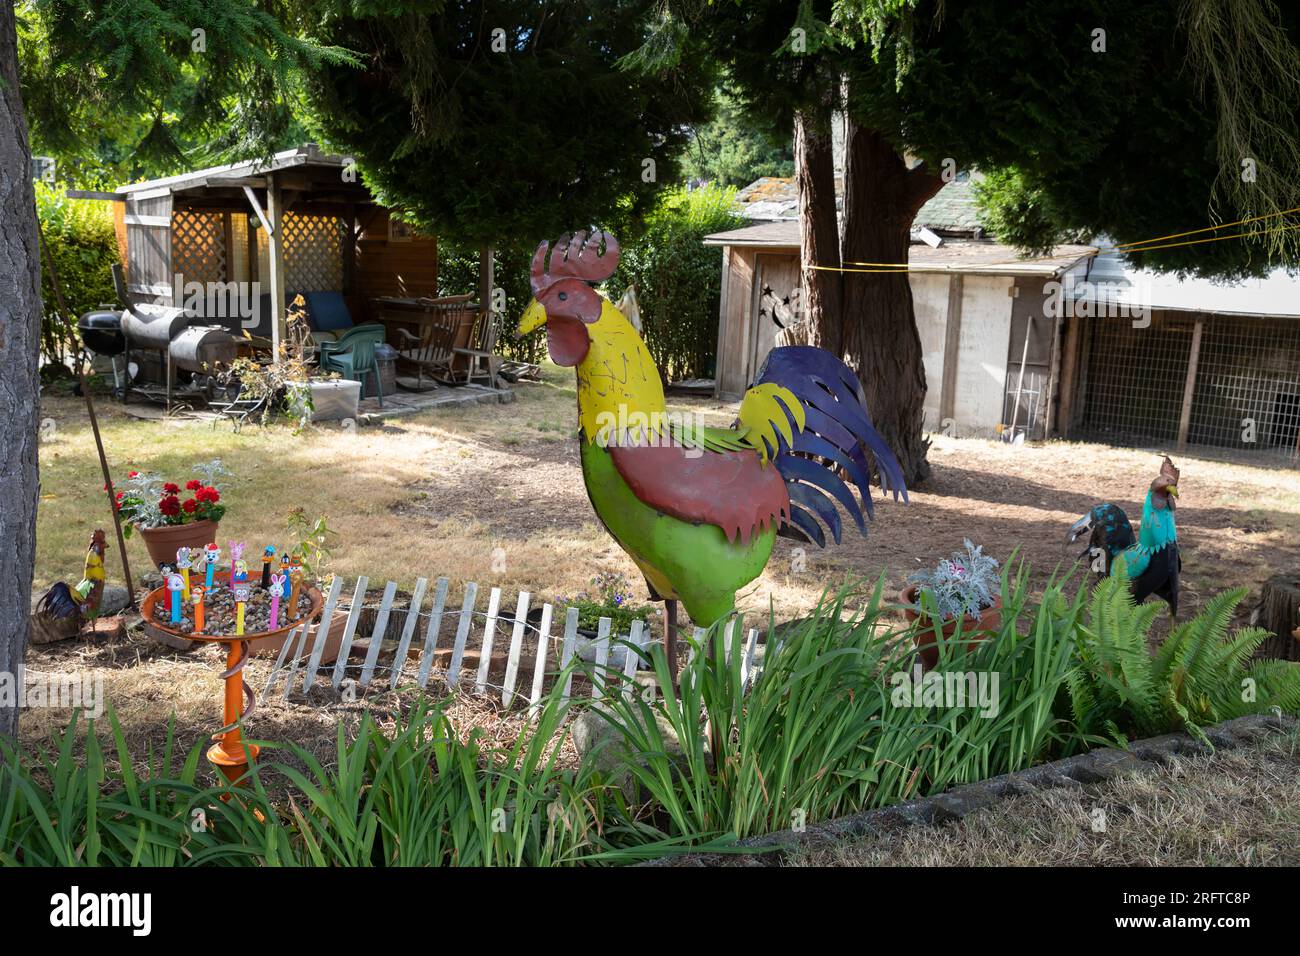 Rustic art fills a yard at a home in Seattle’s affluent North Admiral neighborhood. Stock Photo